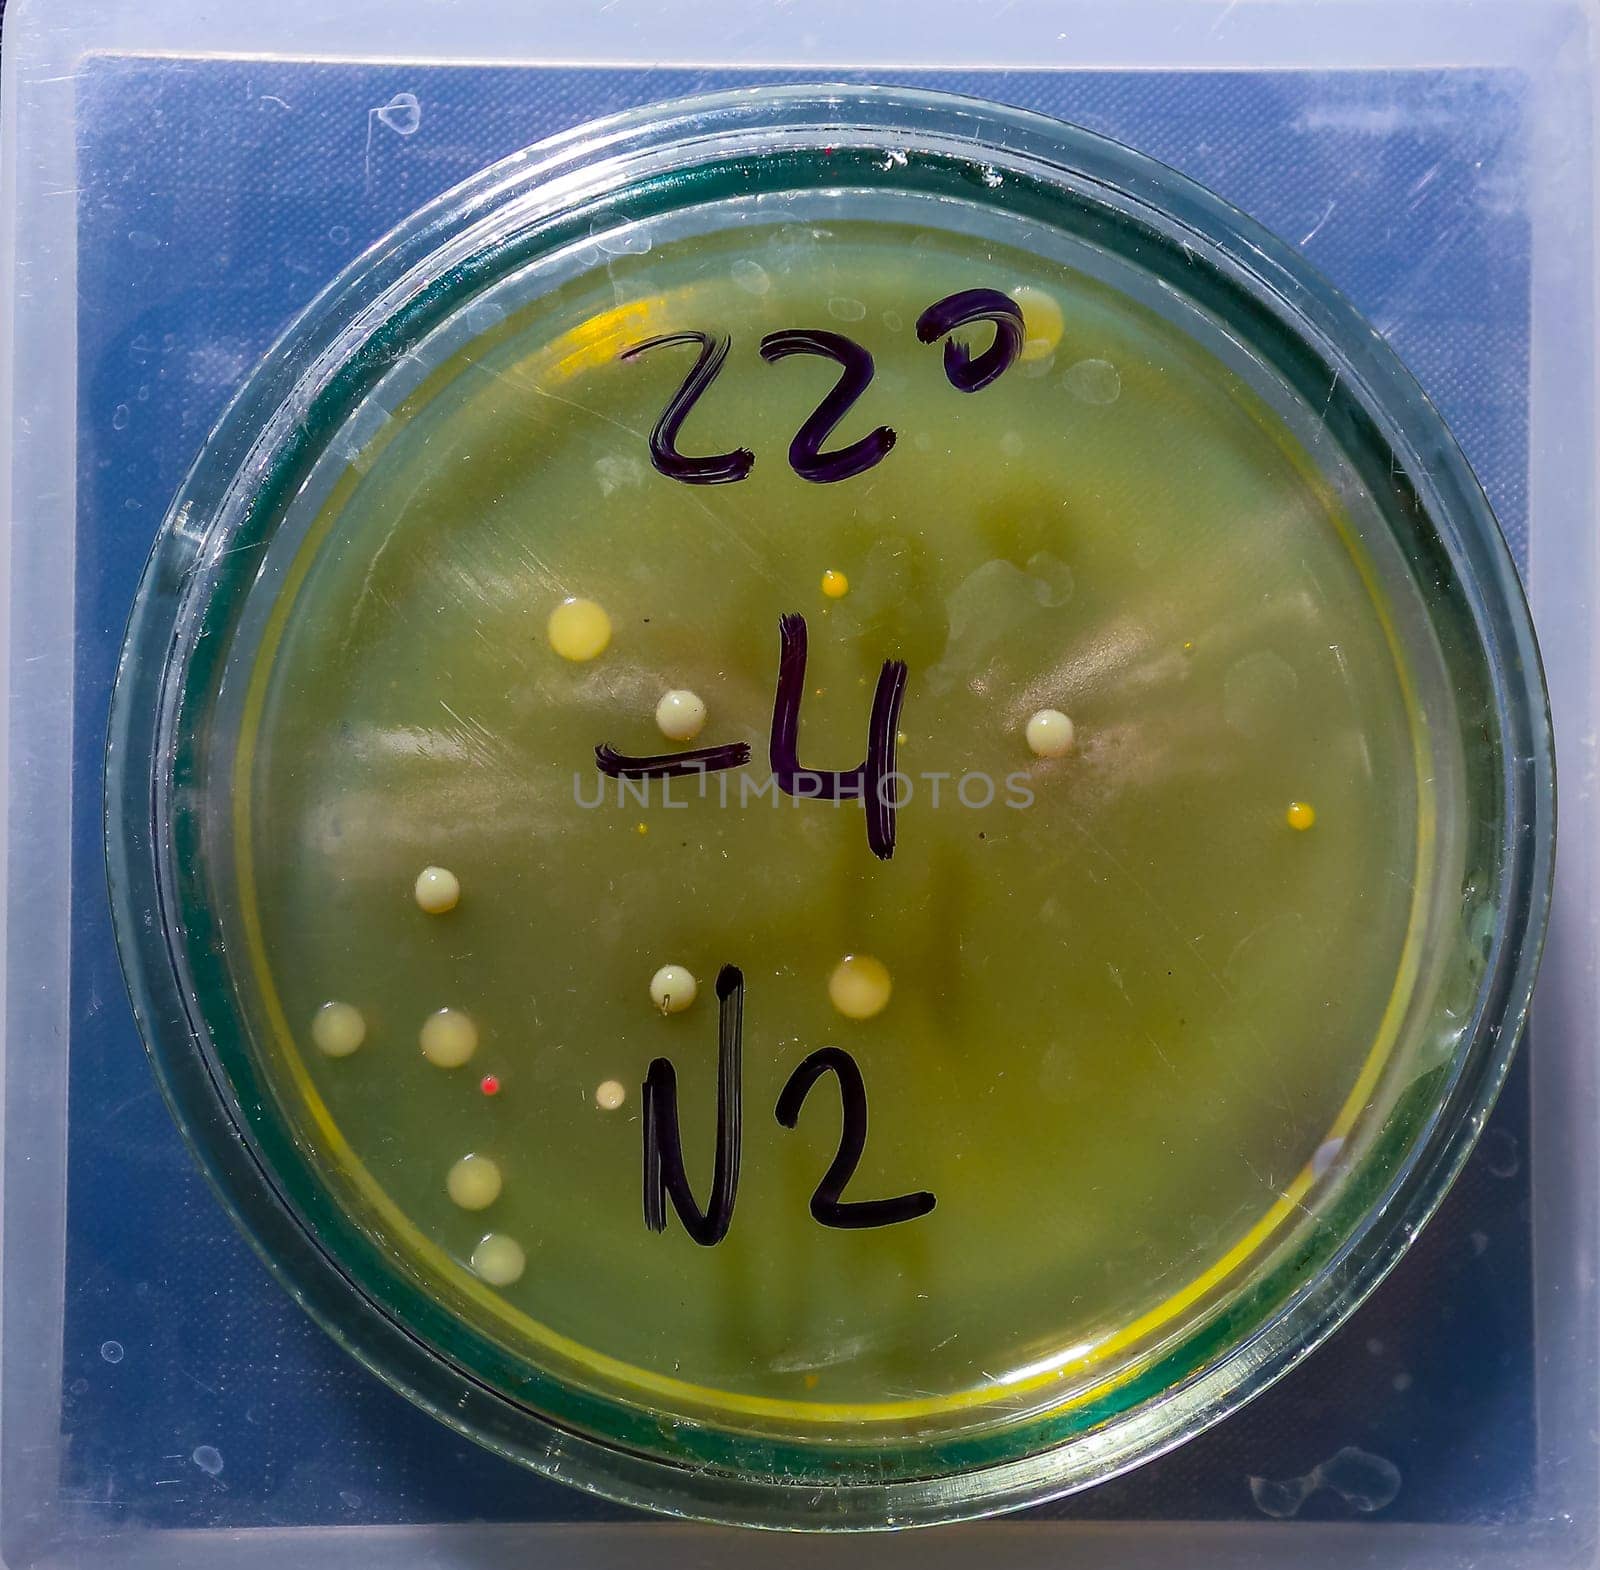 Colonies of pathogenic bacteria in a Petri dish, microbiological studies by Hydrobiolog